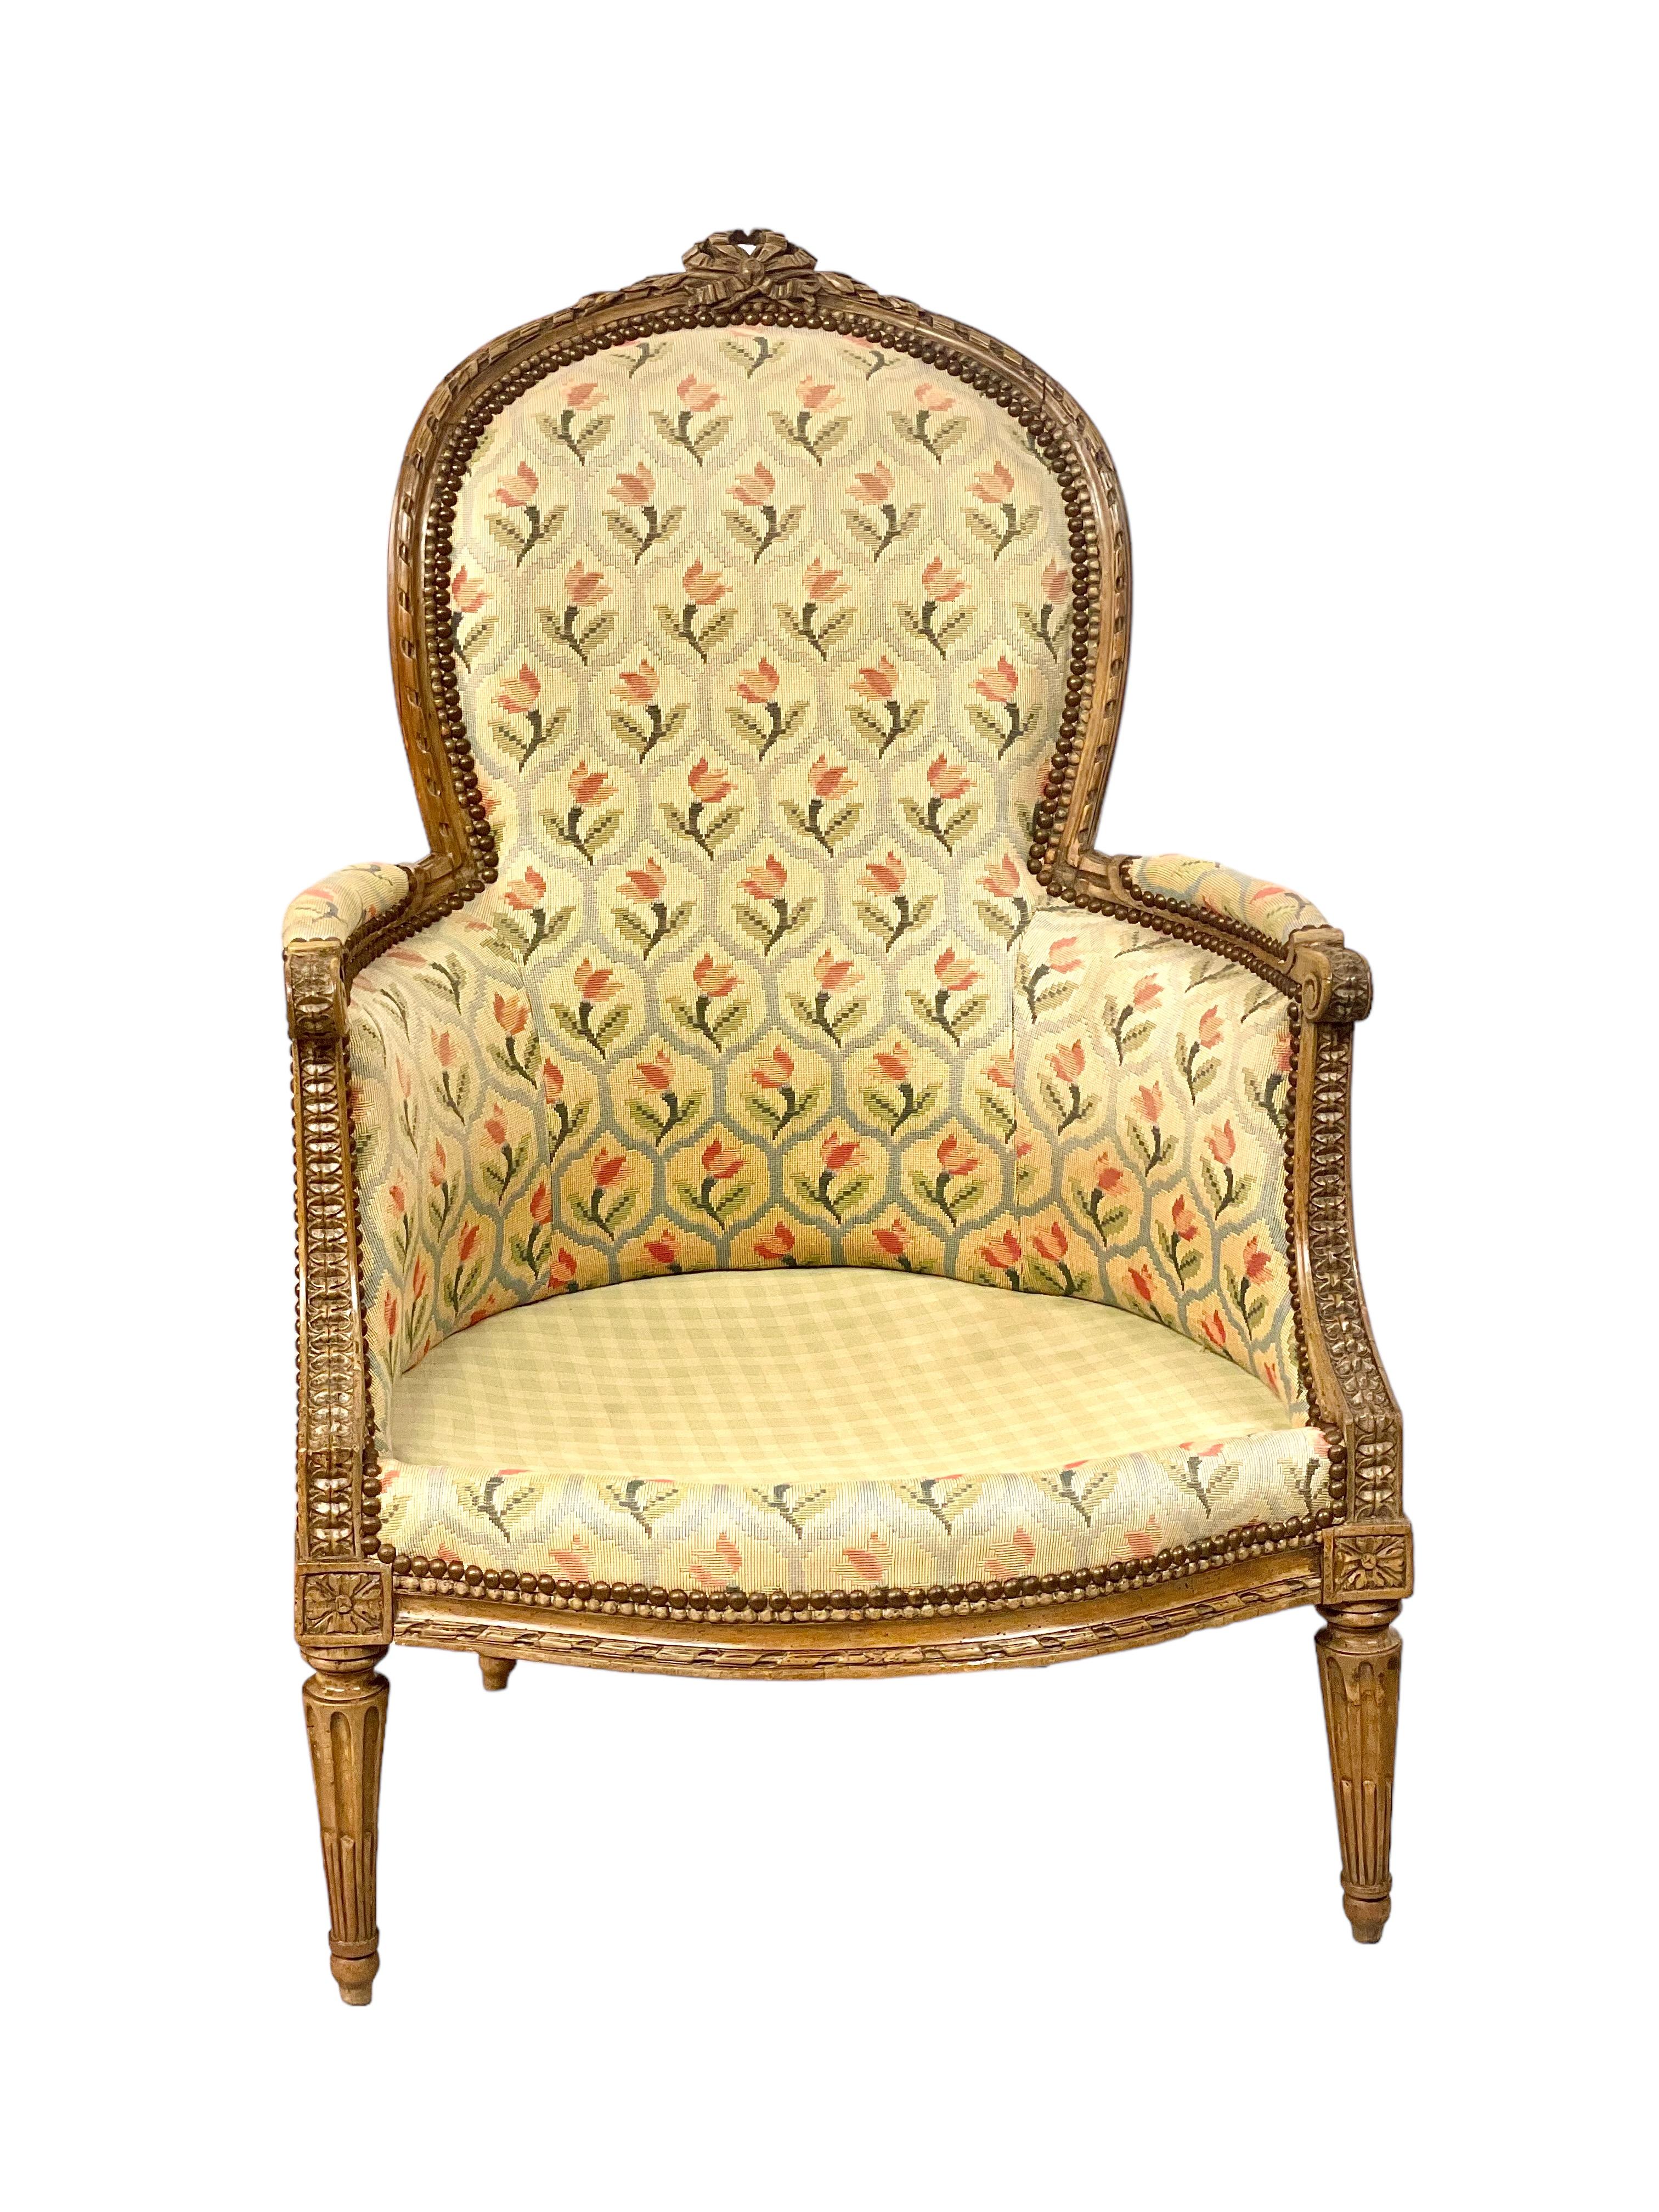 Louis XVI Period Bergere Chair 18th Century  For Sale 8